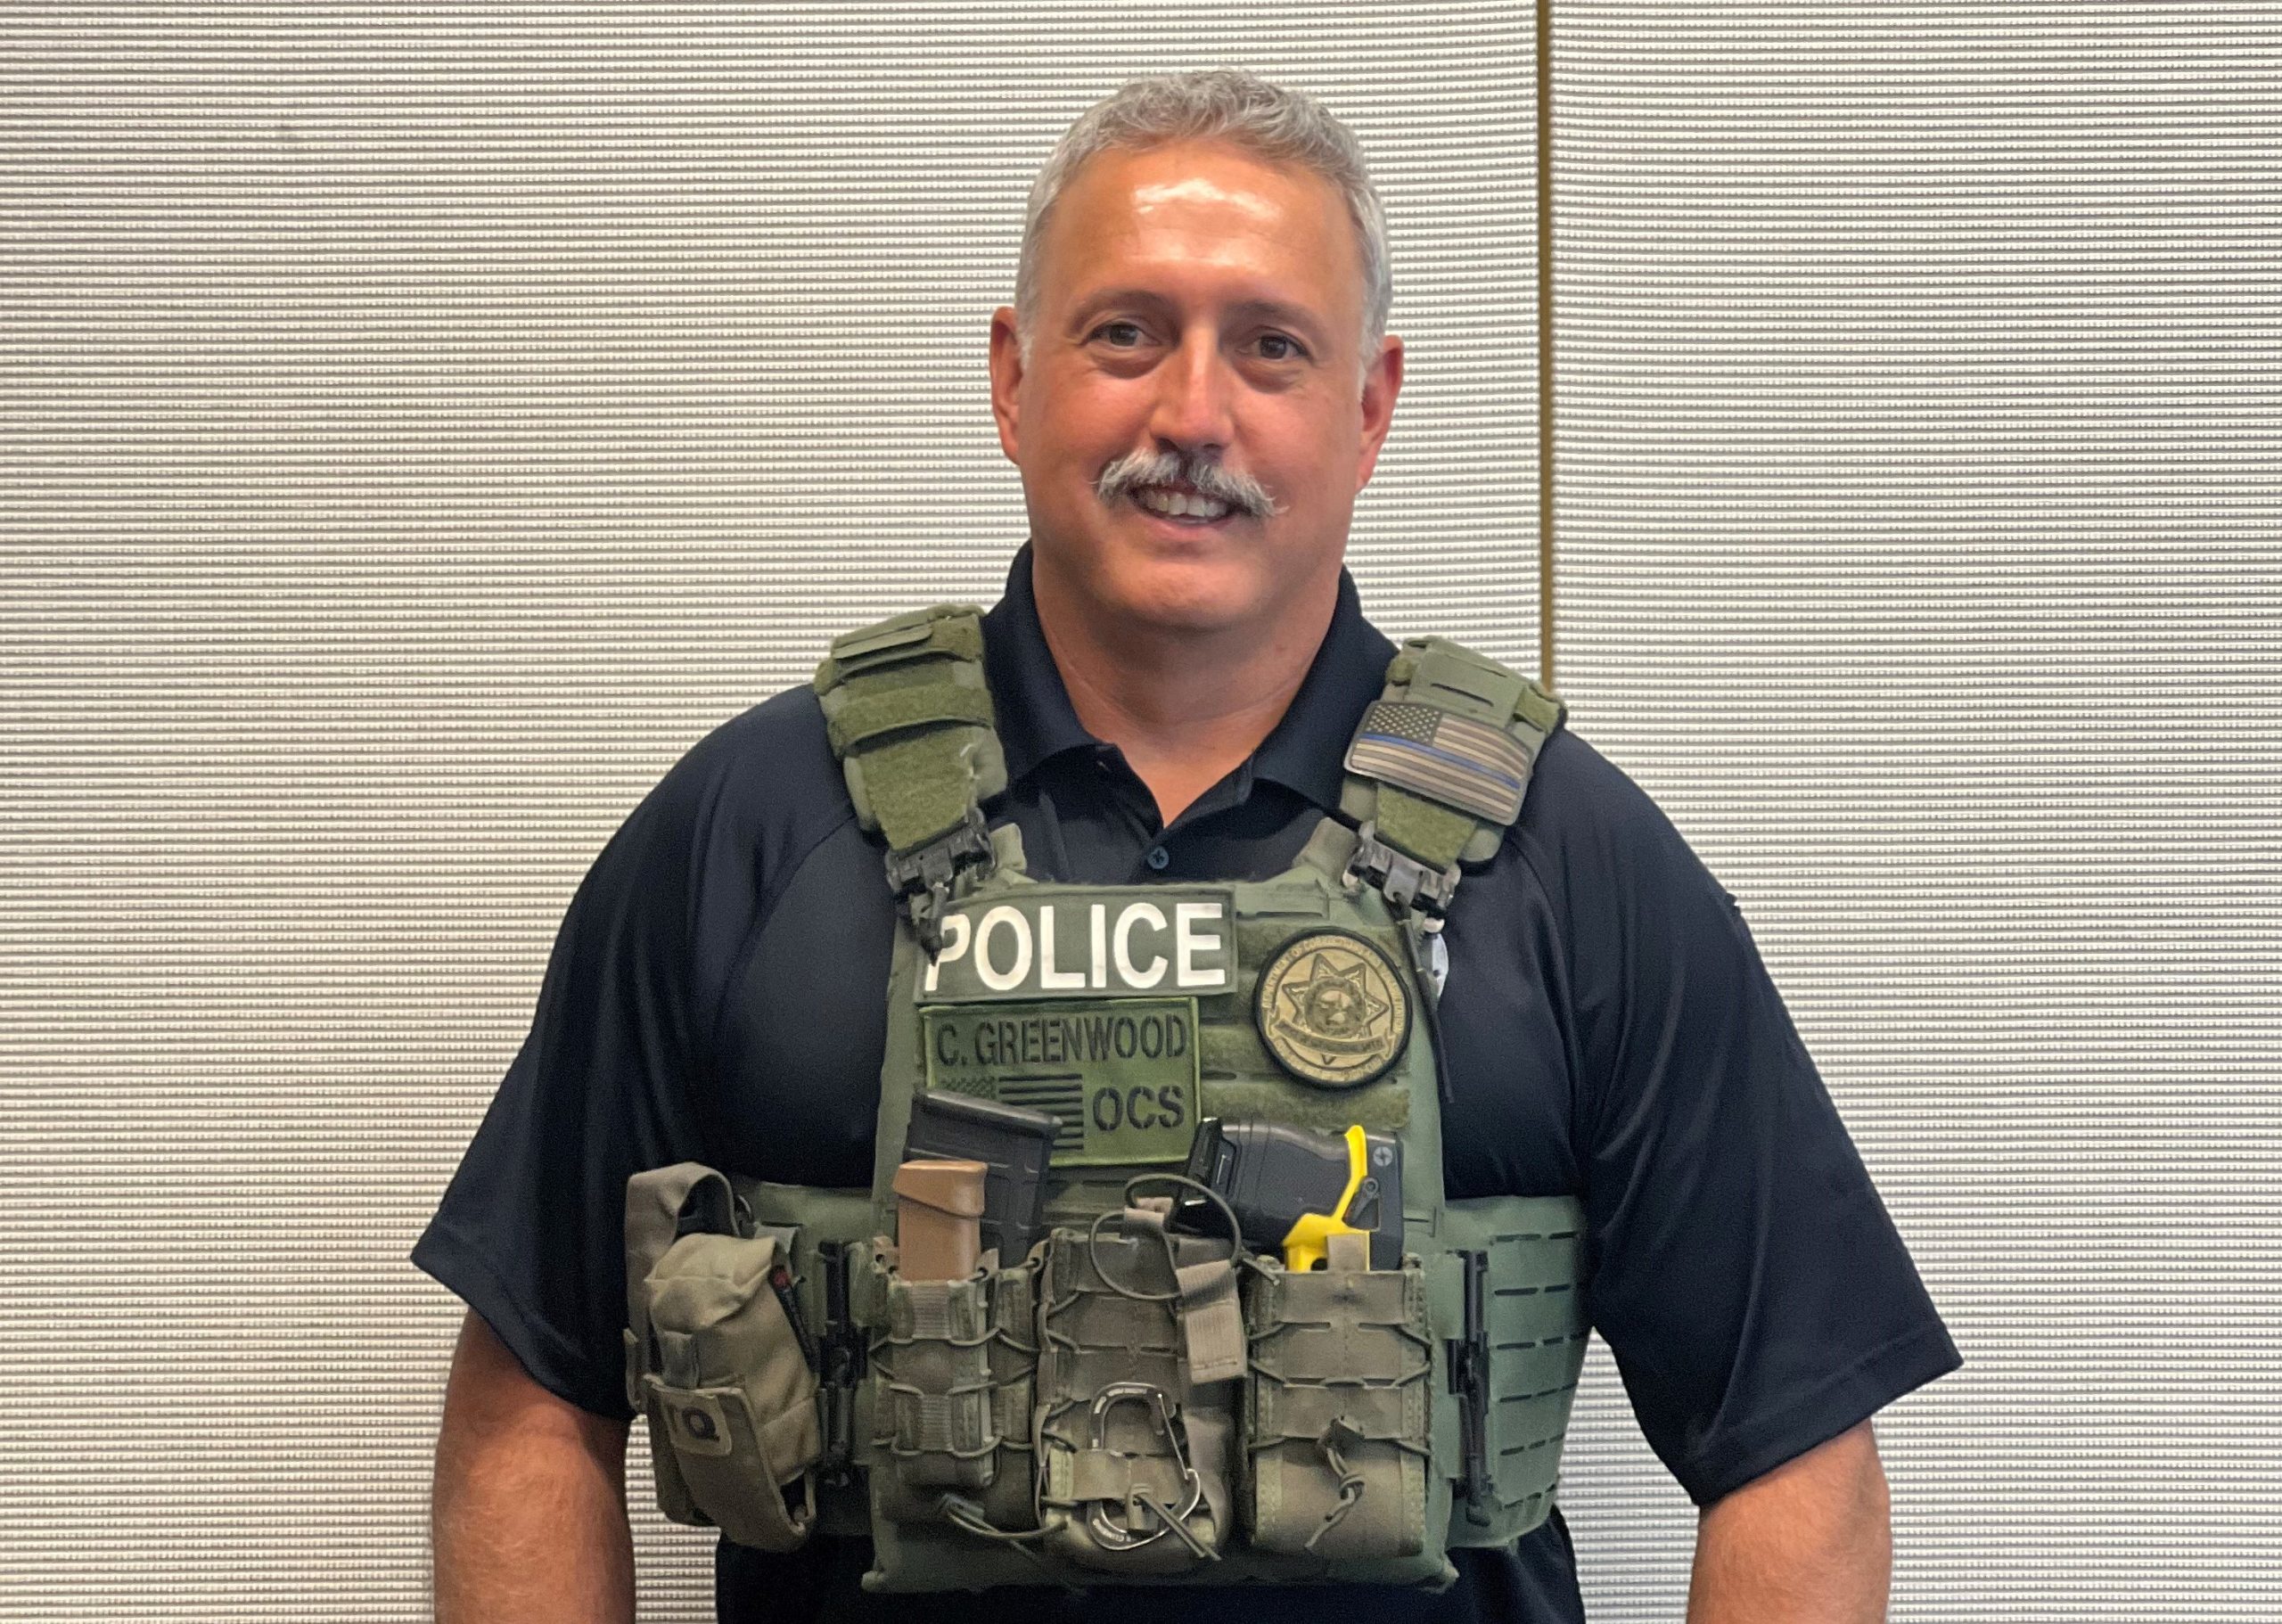 Chad Greenwood wearing police vest and gear.